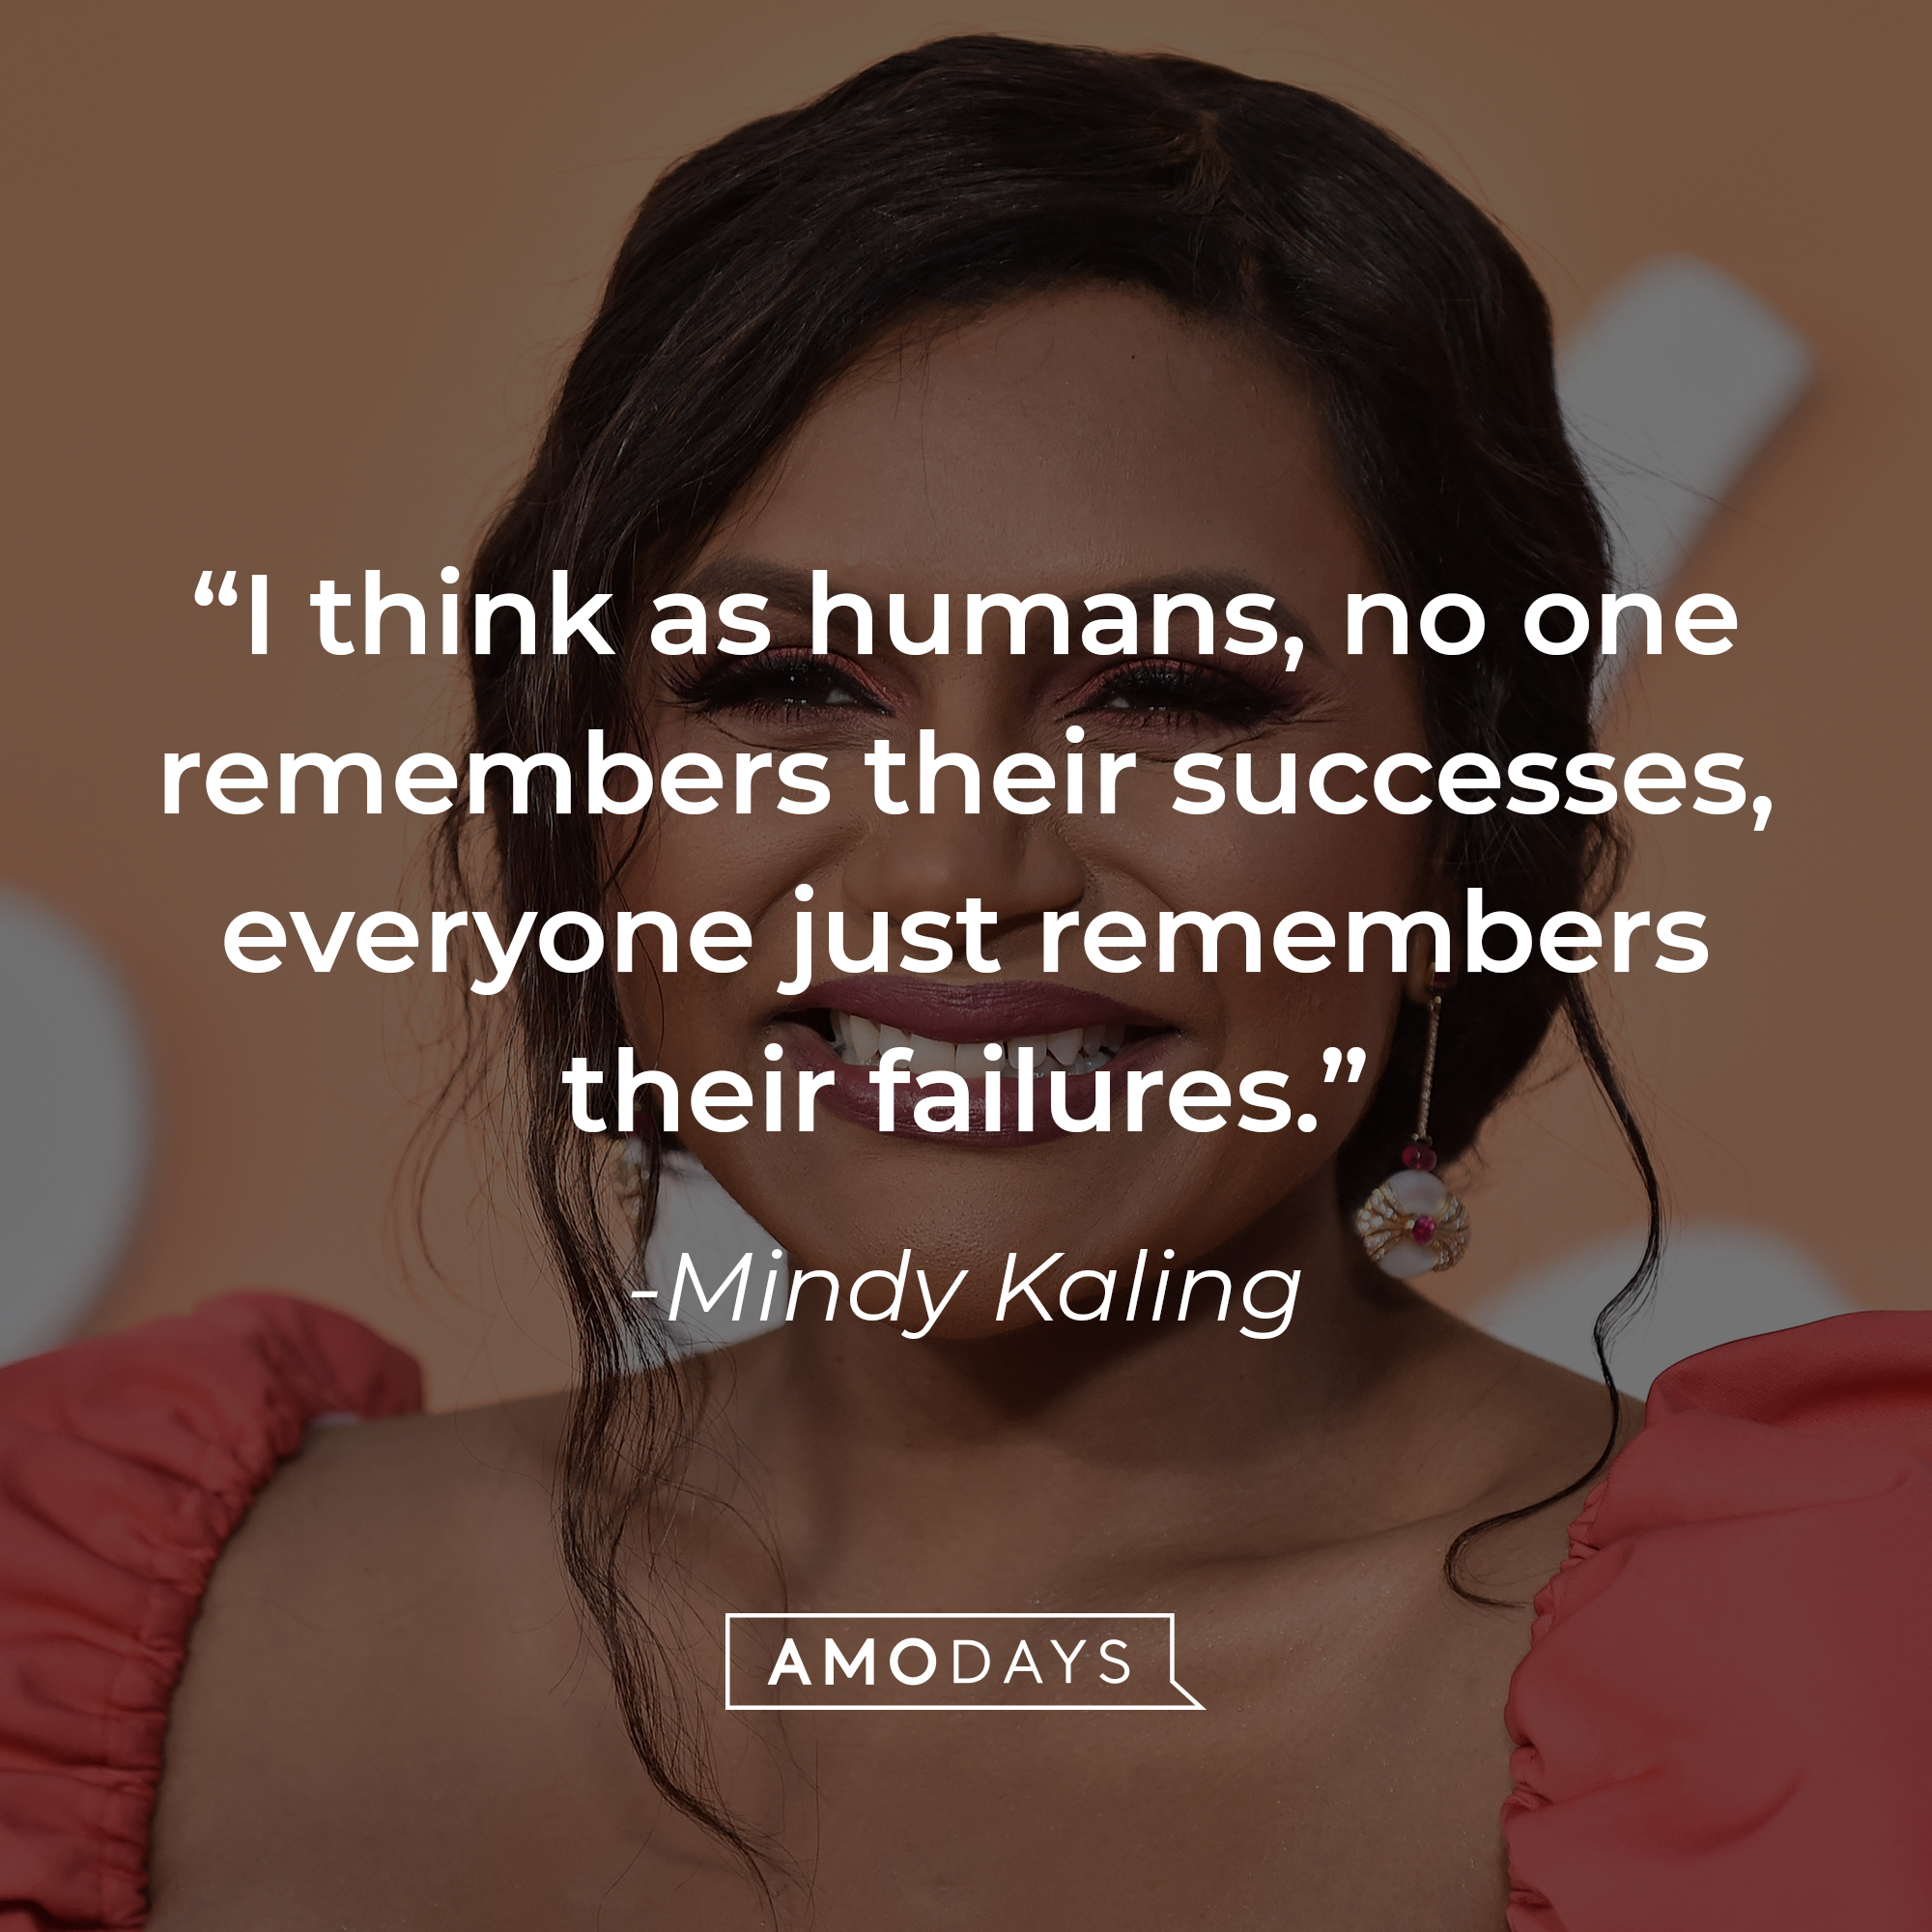 Mindy Kaling's quote: "I think as humans, no one remembers their successes, everyone just remembers their failures." | Source: Getty Images